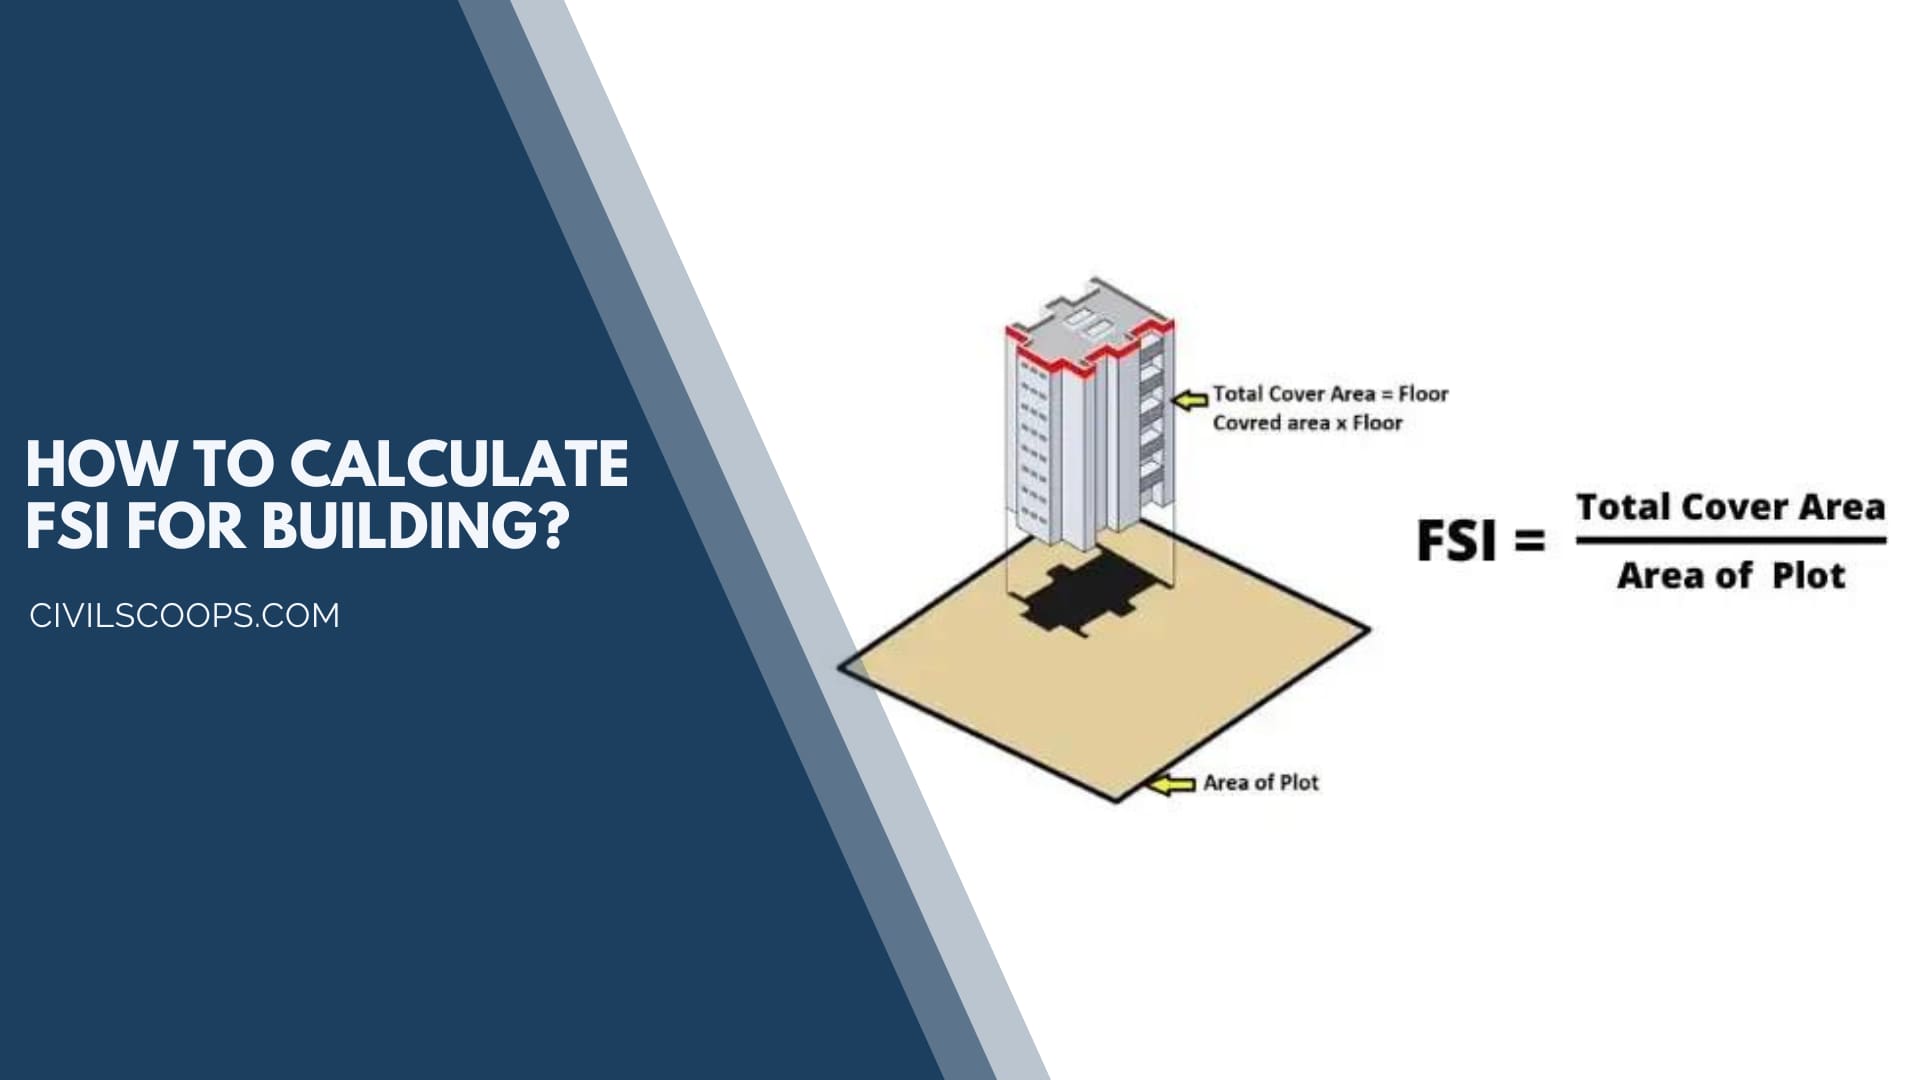  How to Calculate FSI for Building?